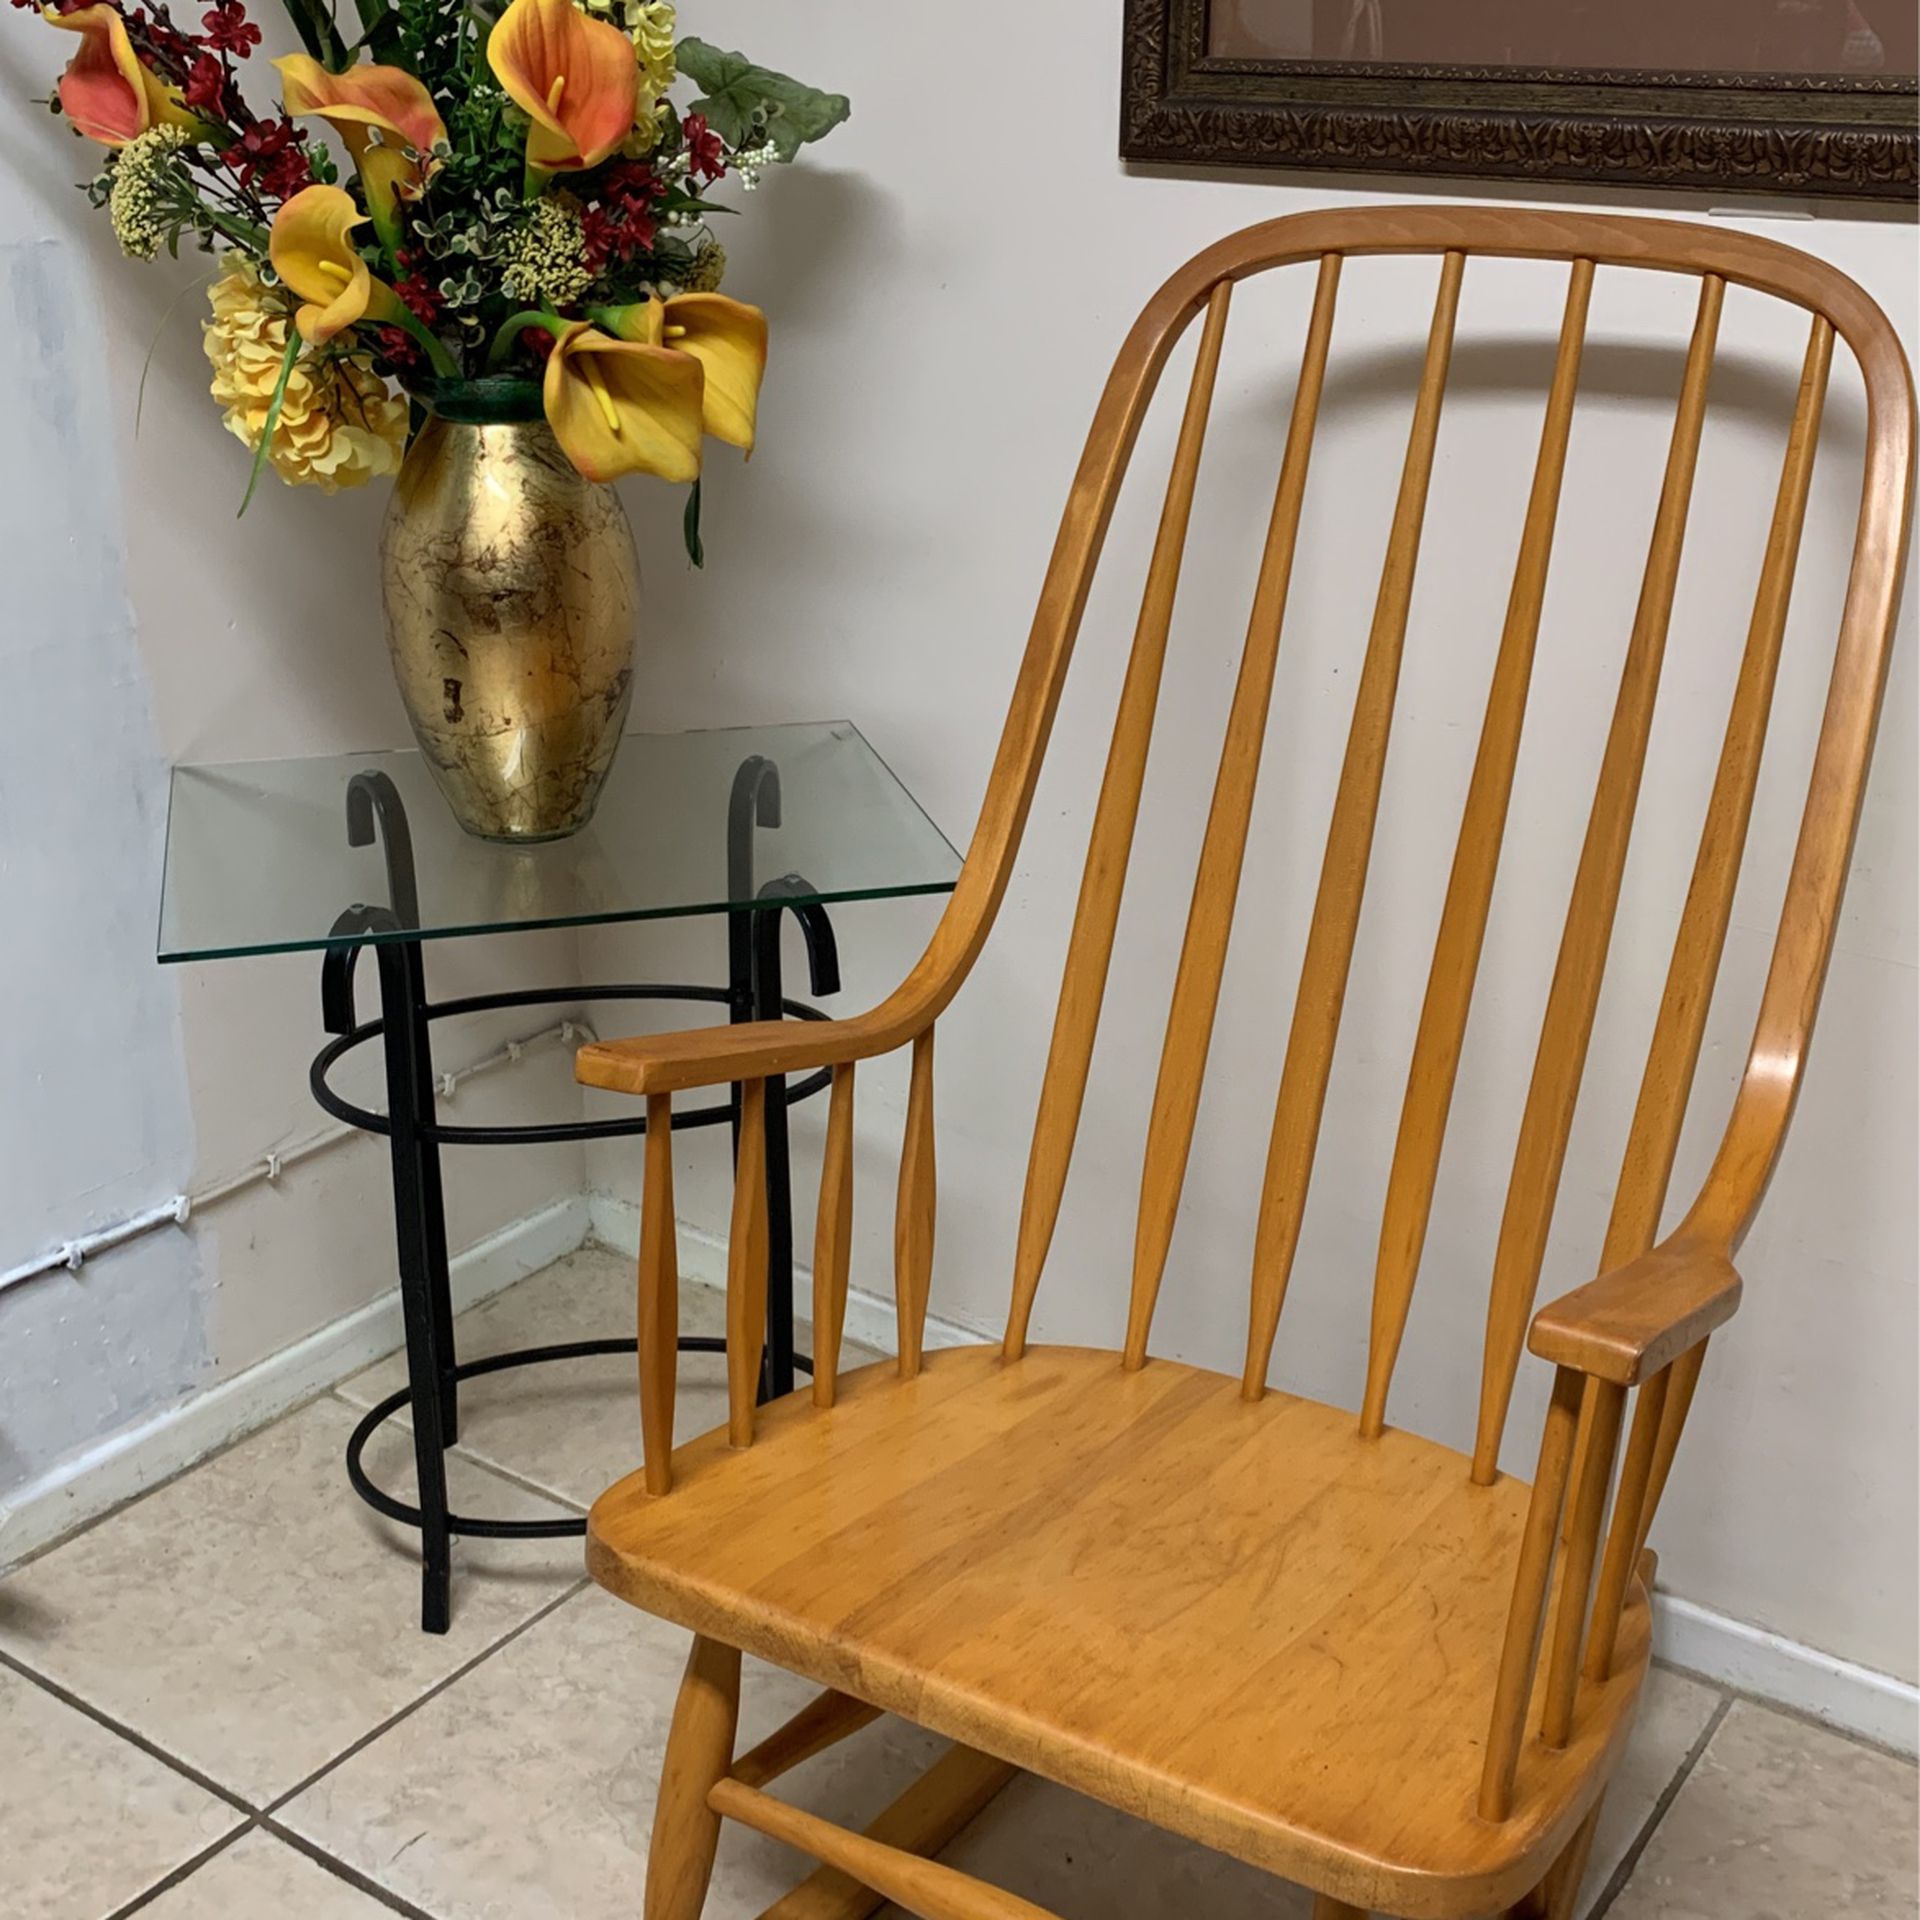 Wooden Rocking Chair $45 OBO